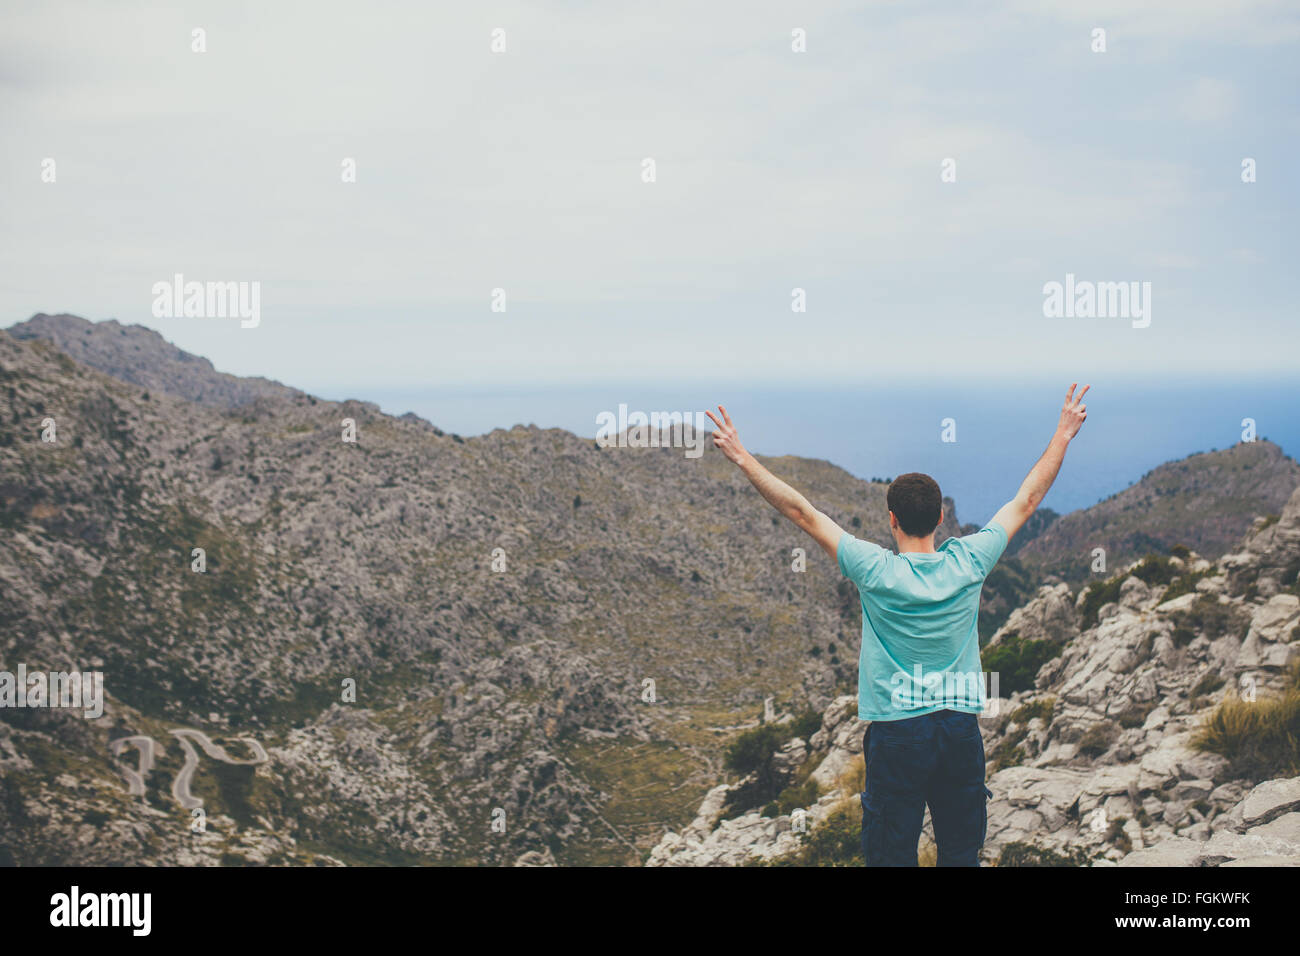 Young man standing on cliff with hands raised Stock Photo